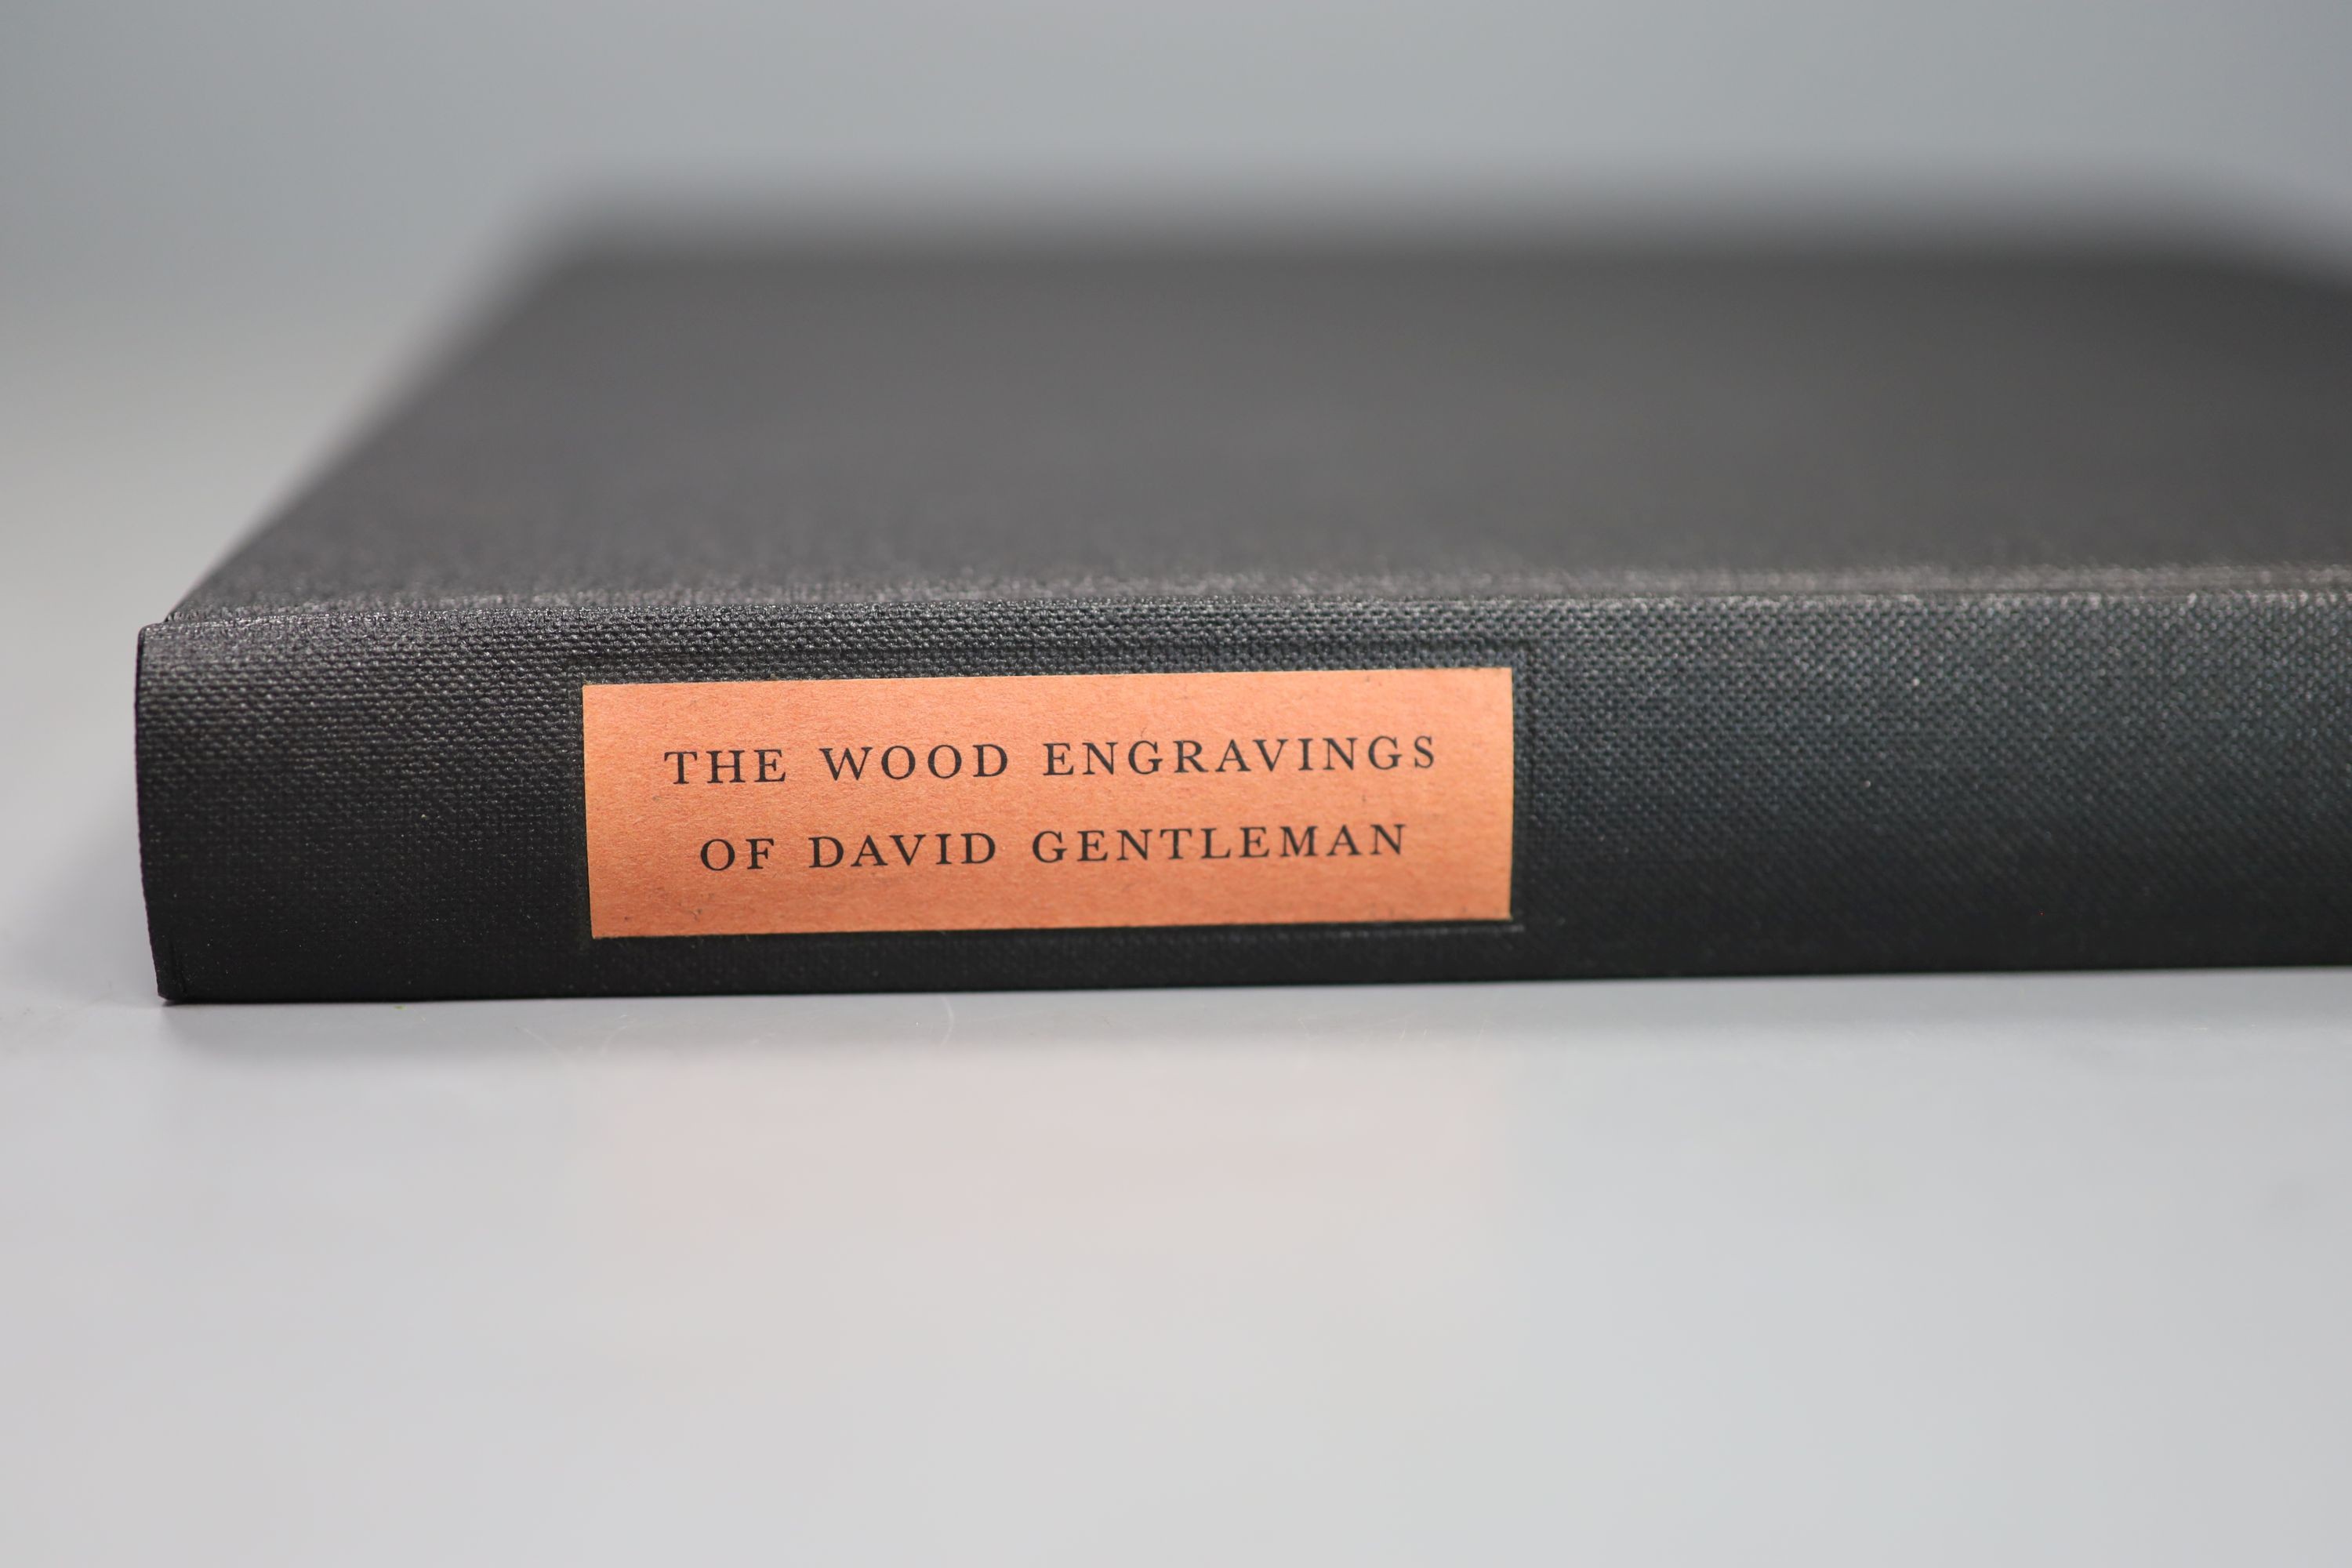 Gentleman, David - The Wood Engravings of David Gentleman, oblong folio, cloth, number 290 of 350, signed by the artist, introduction by Fiona MacCarthy, Montgomery, 2000, with slip case